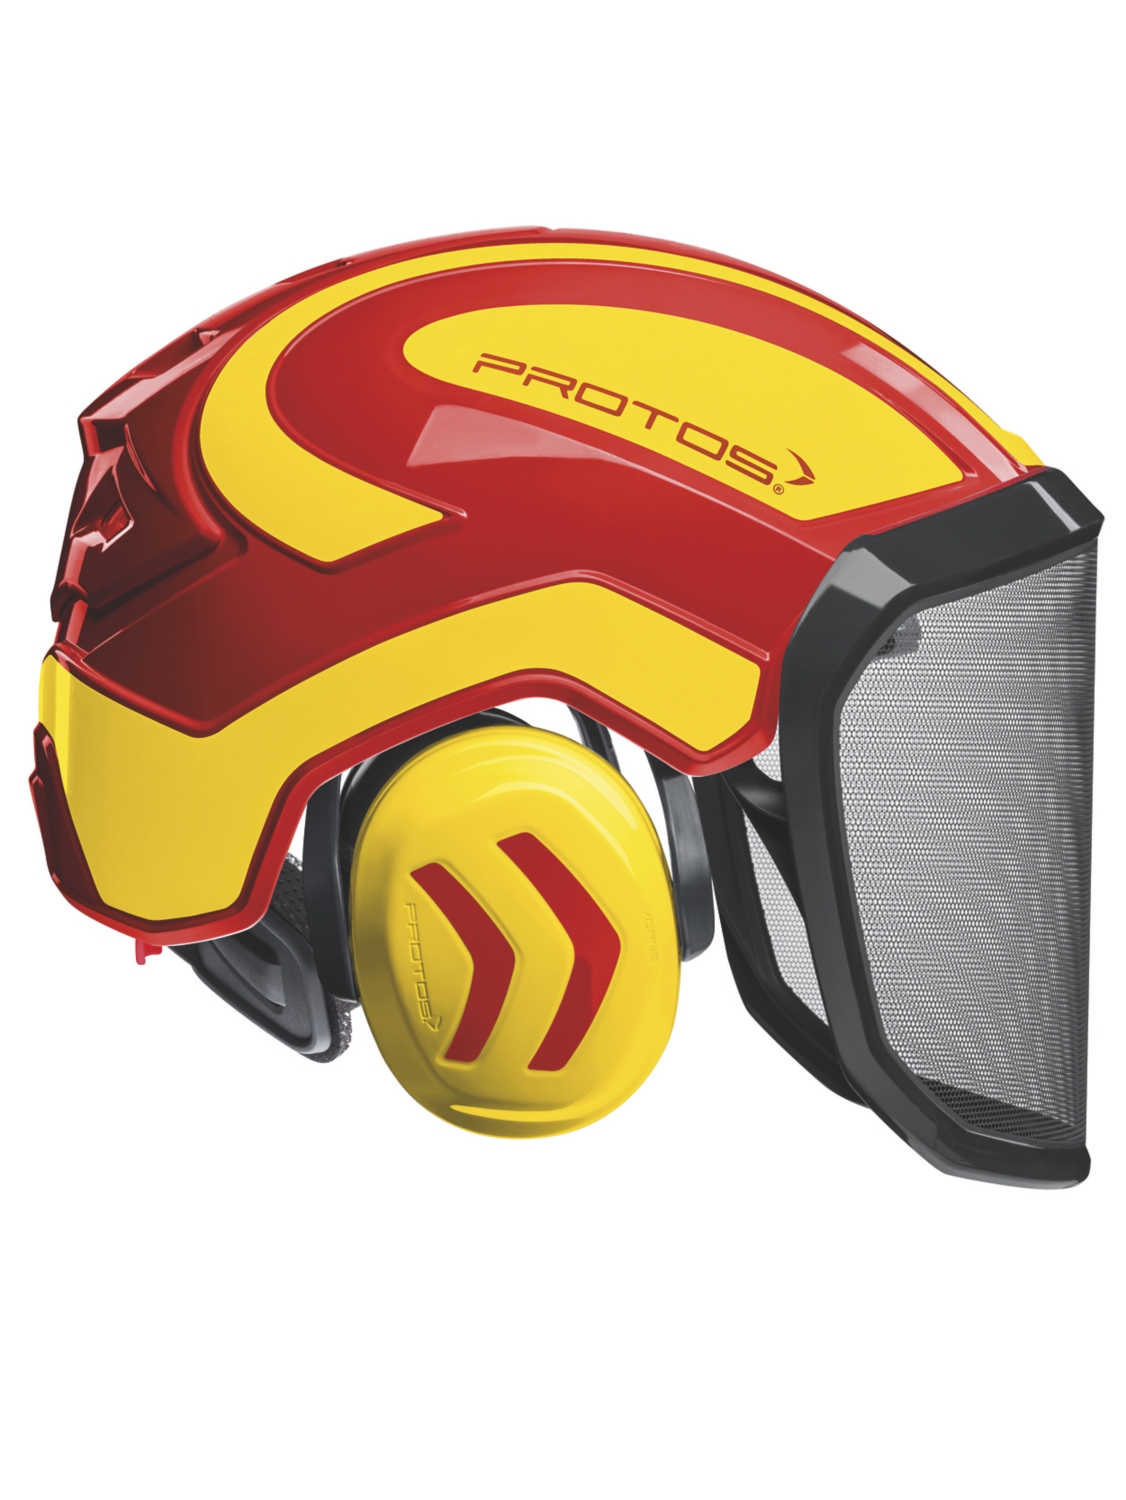  Casque forestier complet Protos Integral Forest 